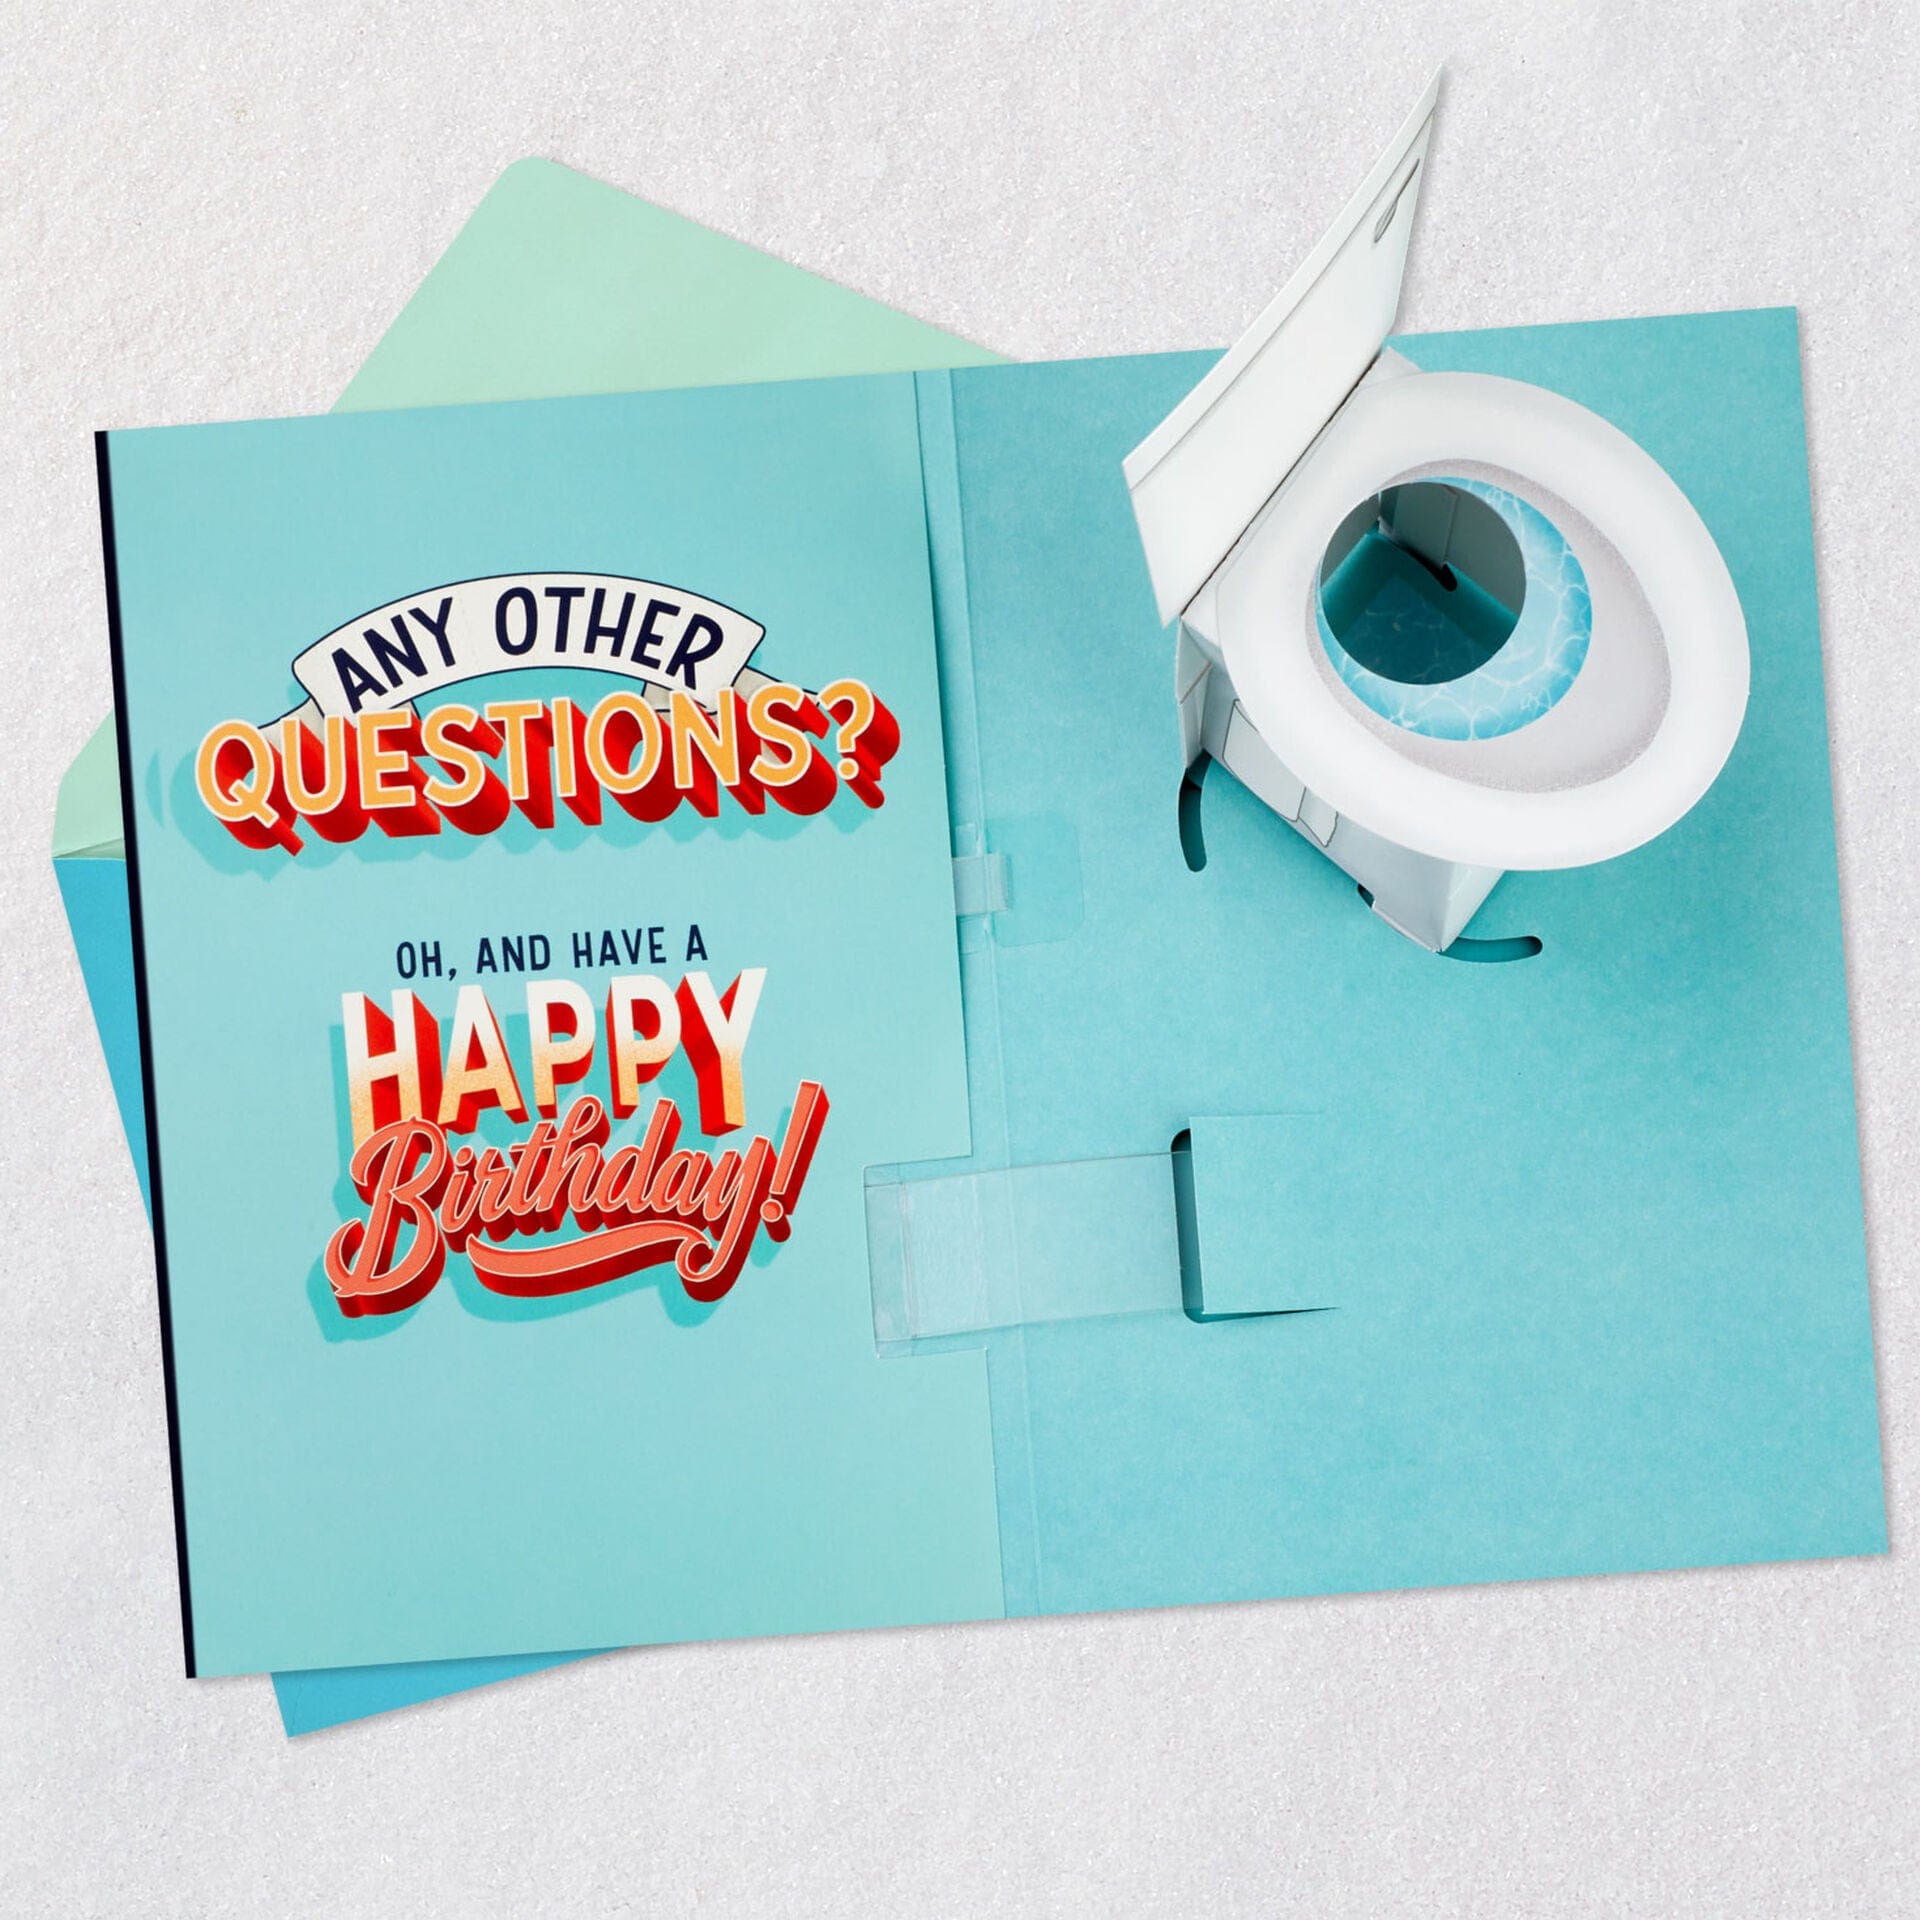 Any Other Questions Funny Pop-Up Birthday Card With Sound - Shelburne Country Store